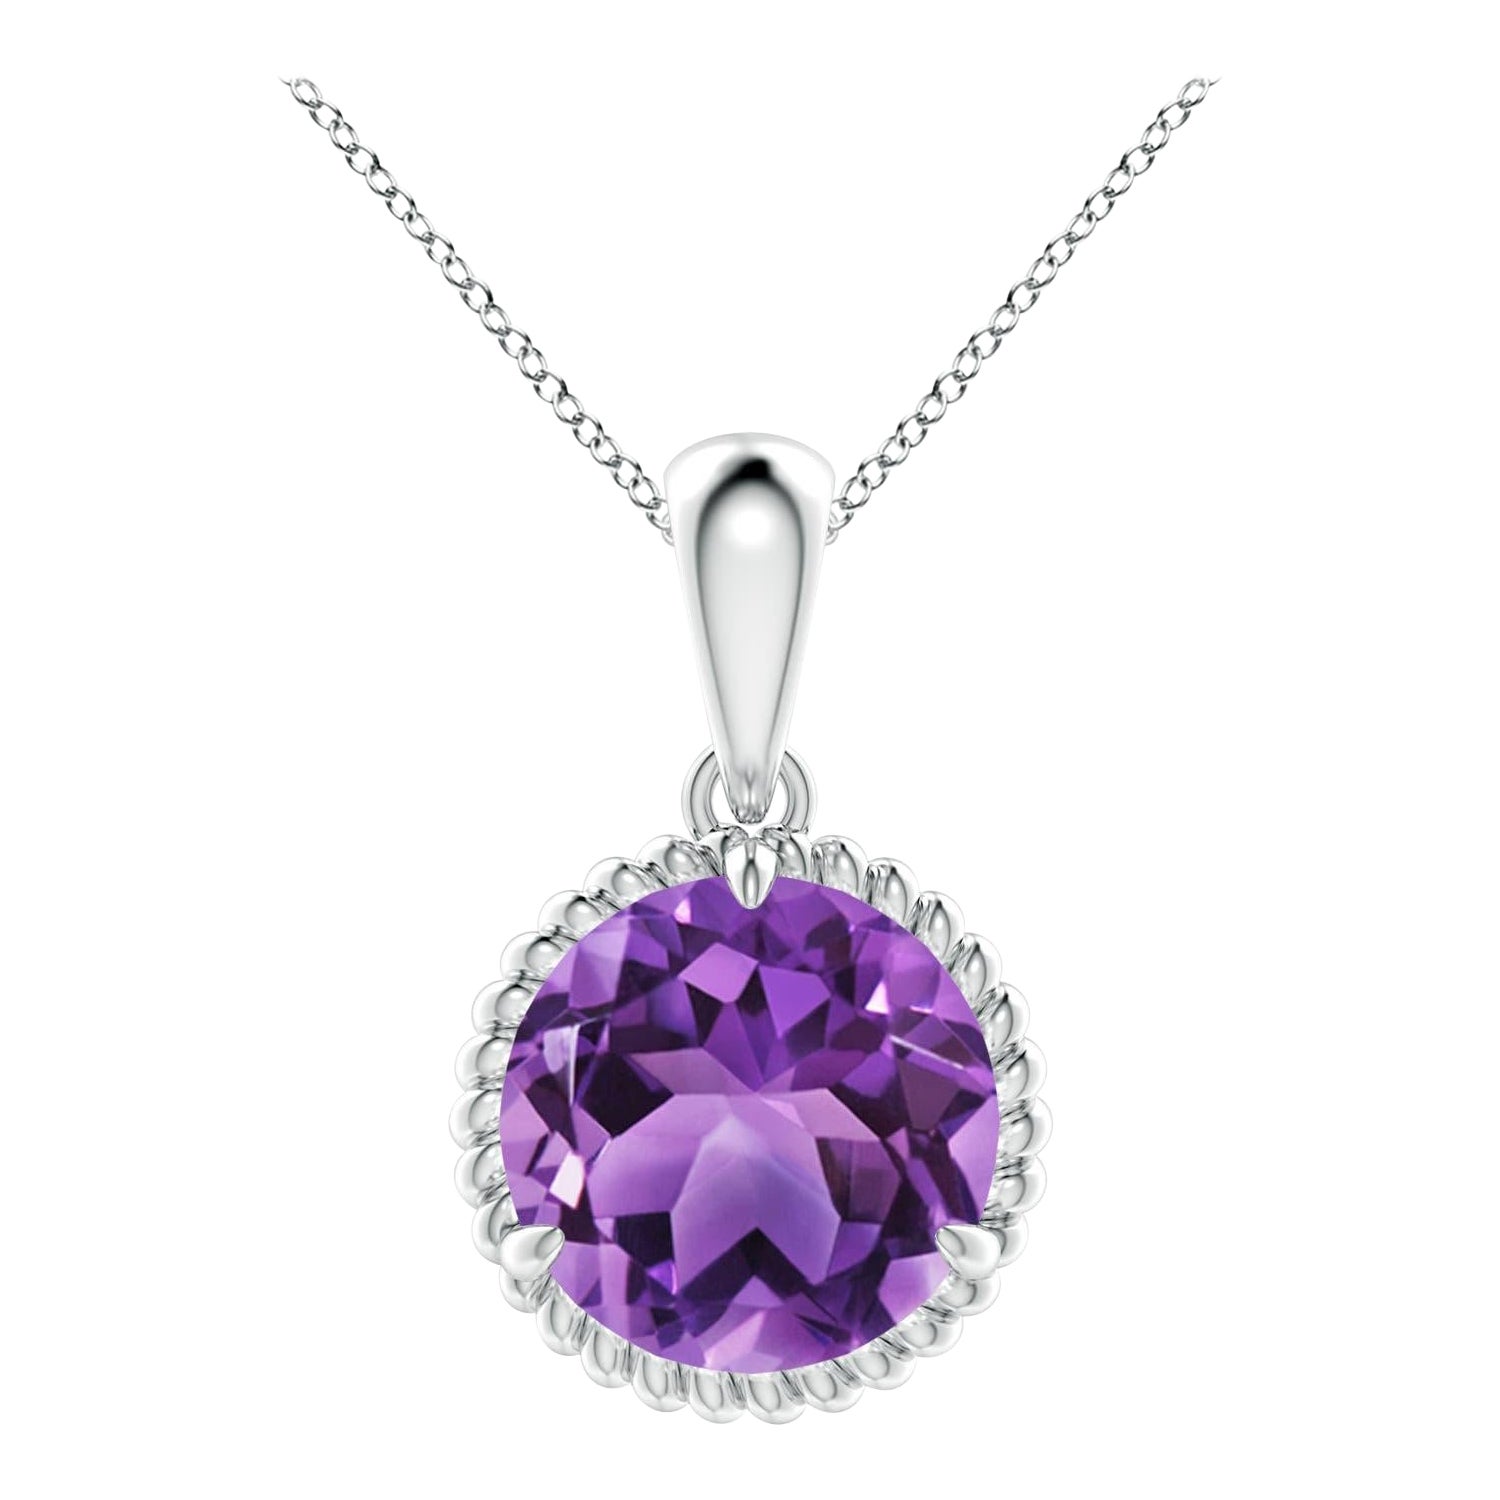 Natural Rope-Framed 3.2ct Amethyst Solitaire Pendant in 14K White Gold